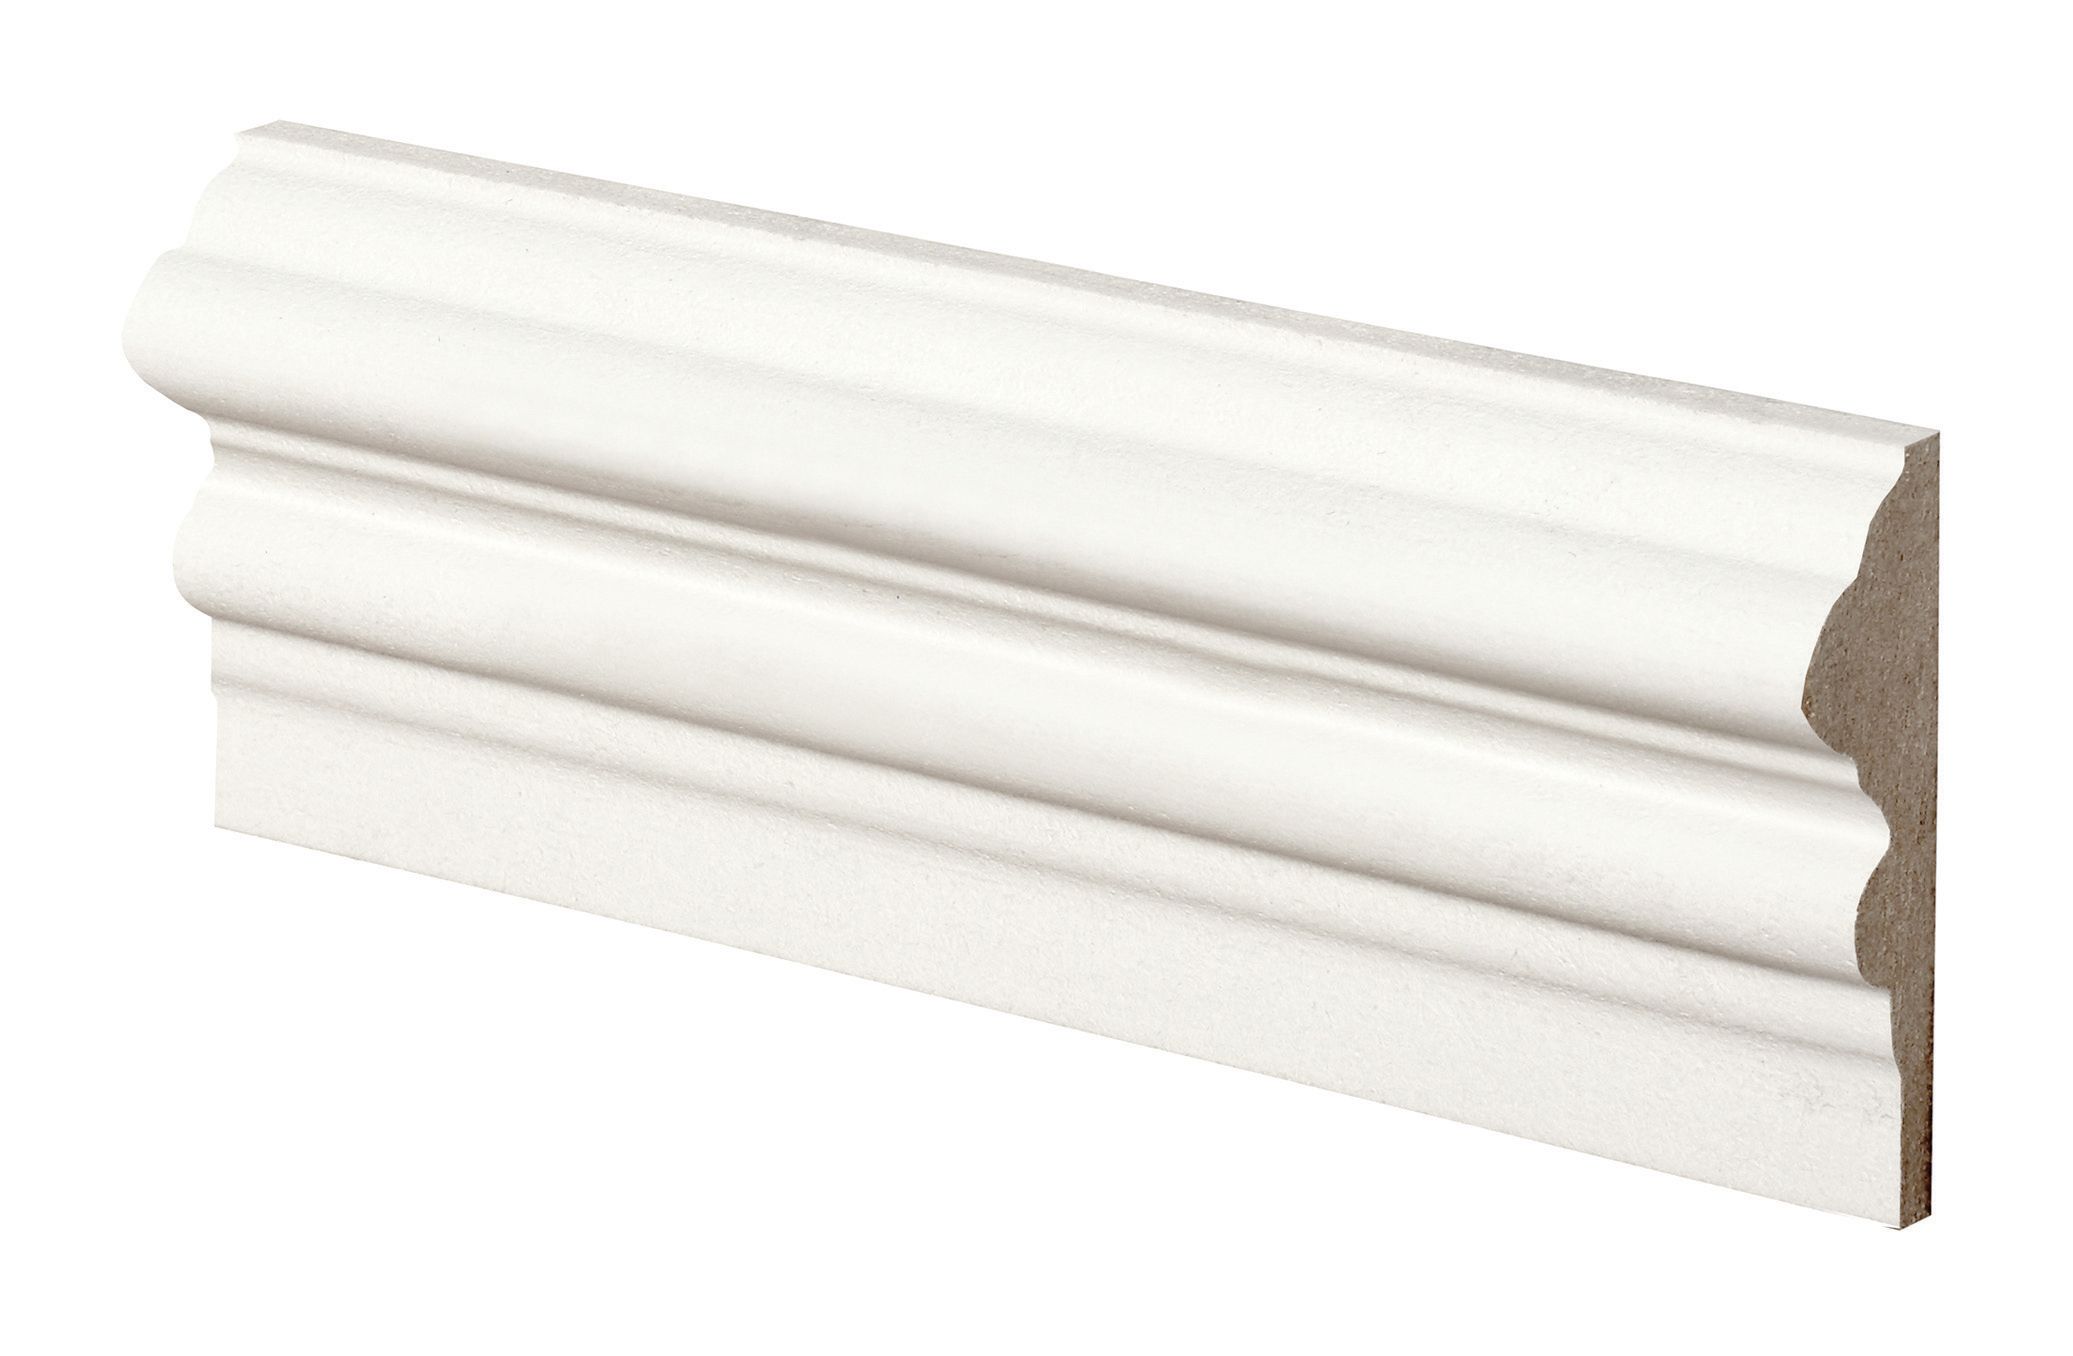 Image of Wickes Dado Rail Primed MDF - 18mm x 58mm x 2.4m Pack of 4